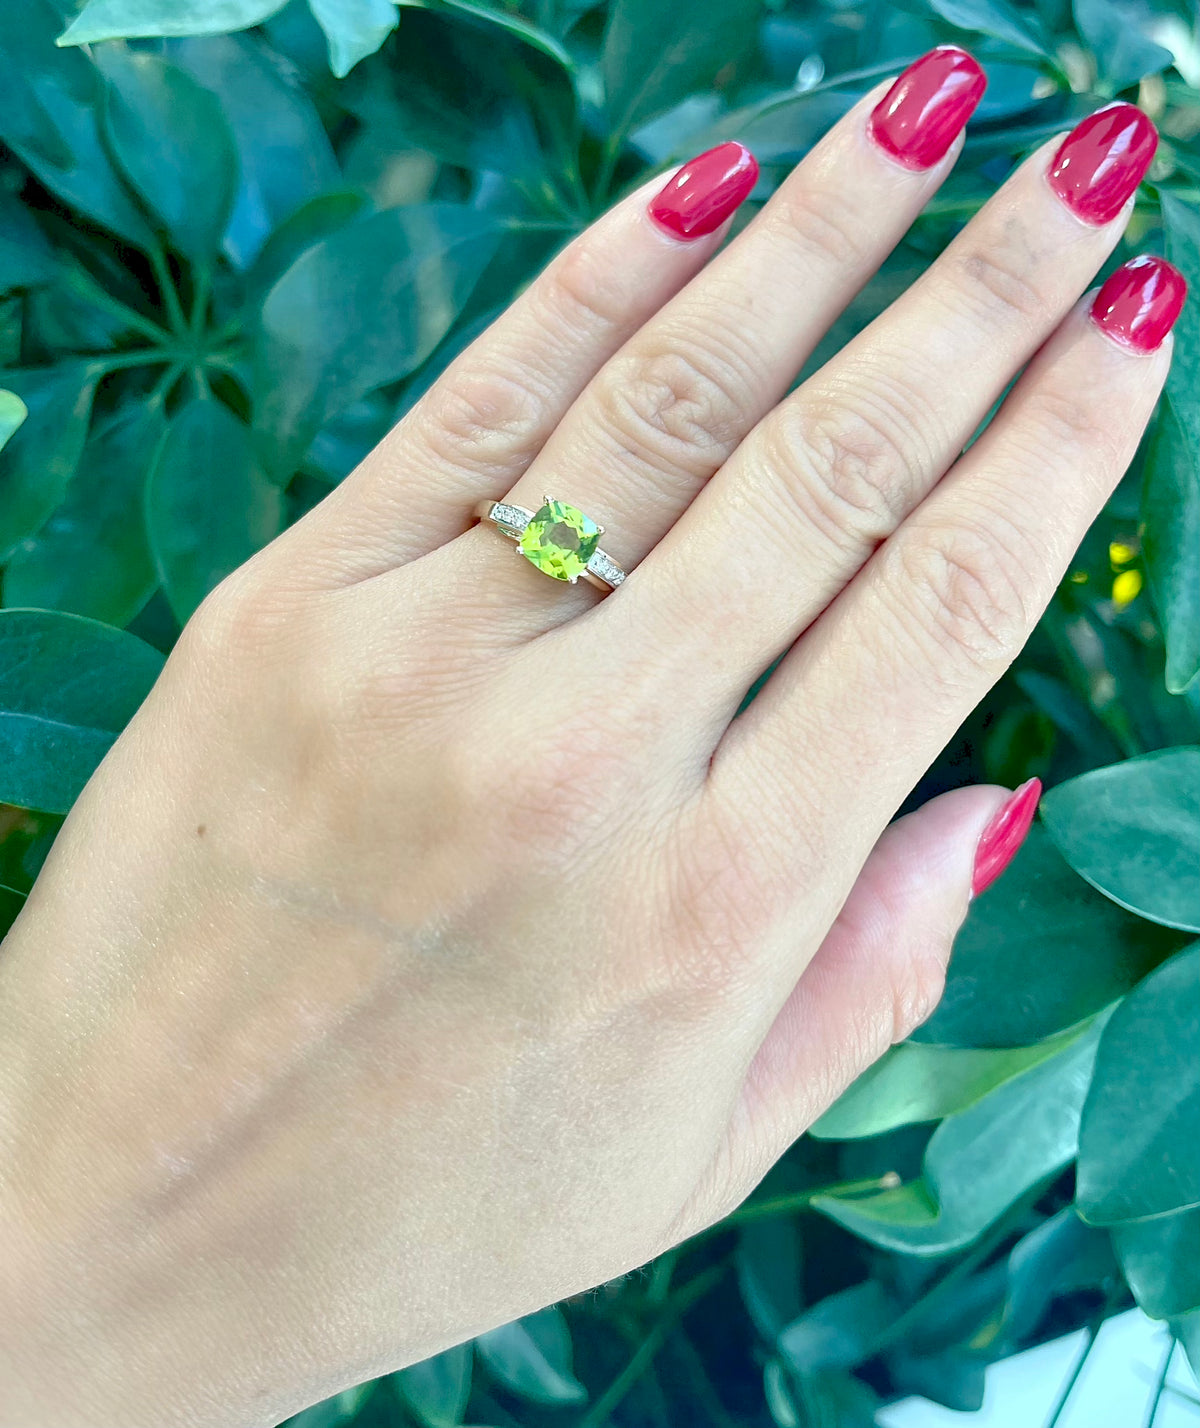 10K Yellow Gold 1.41cttw Peridot and 0.051cttw Diamond Ring - Size 7